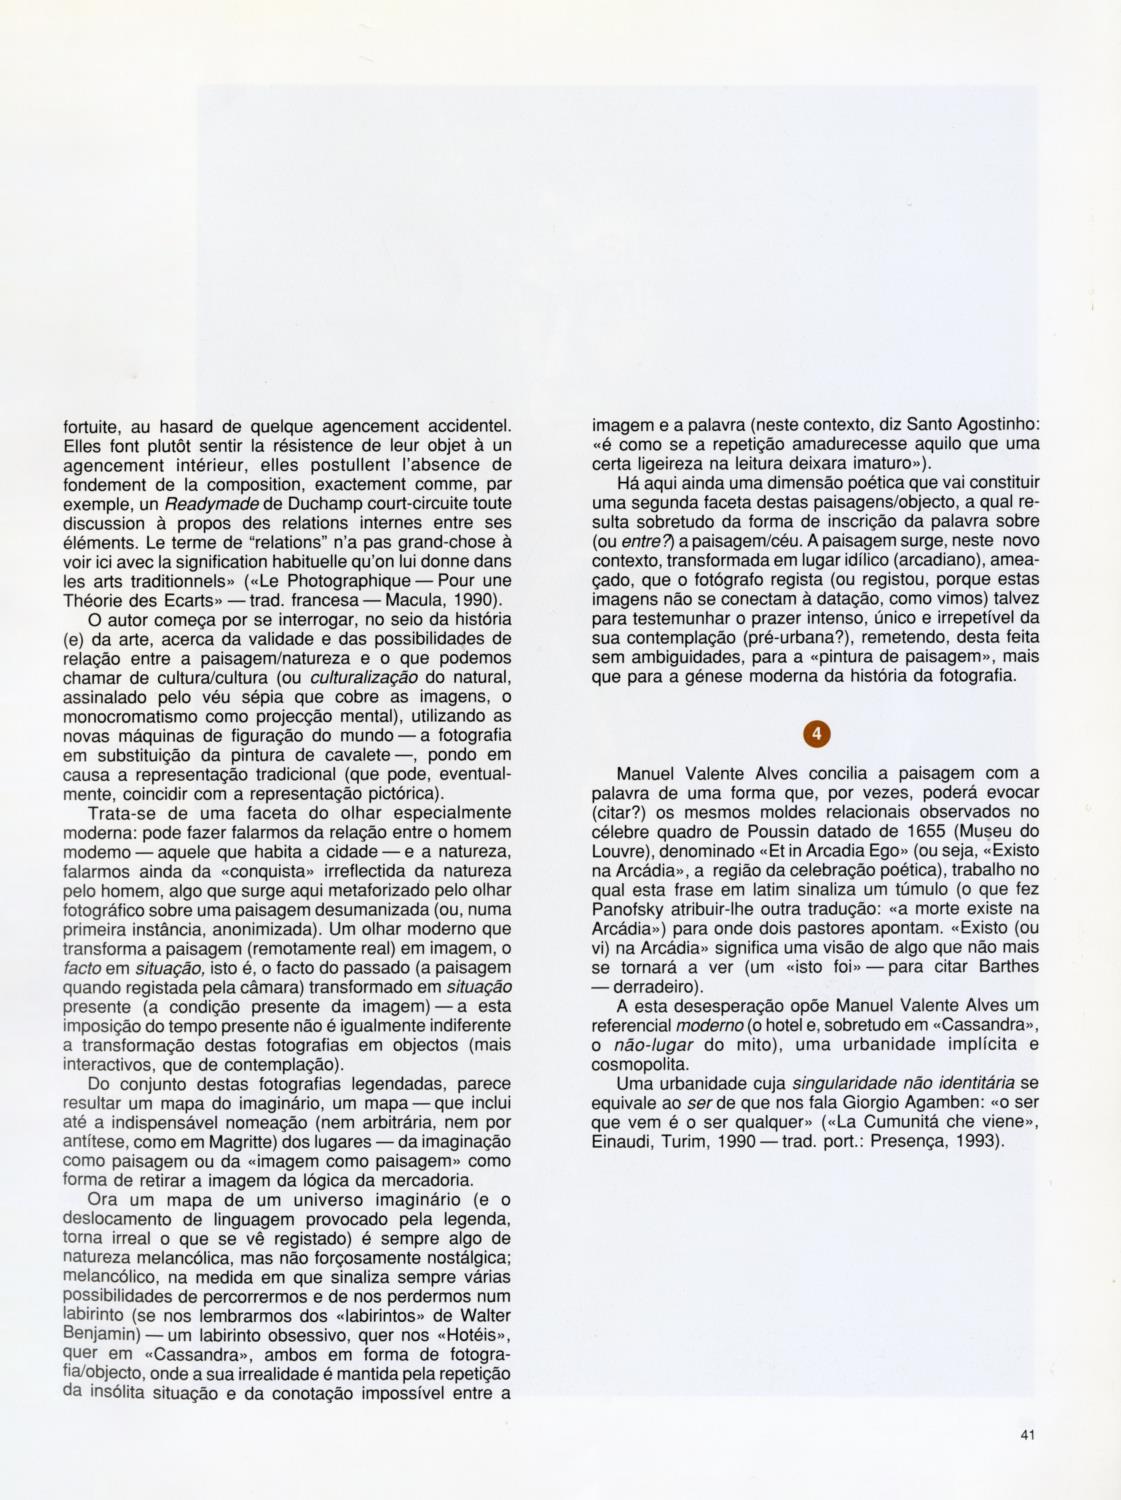 PACL_30a_99_1993_p.41